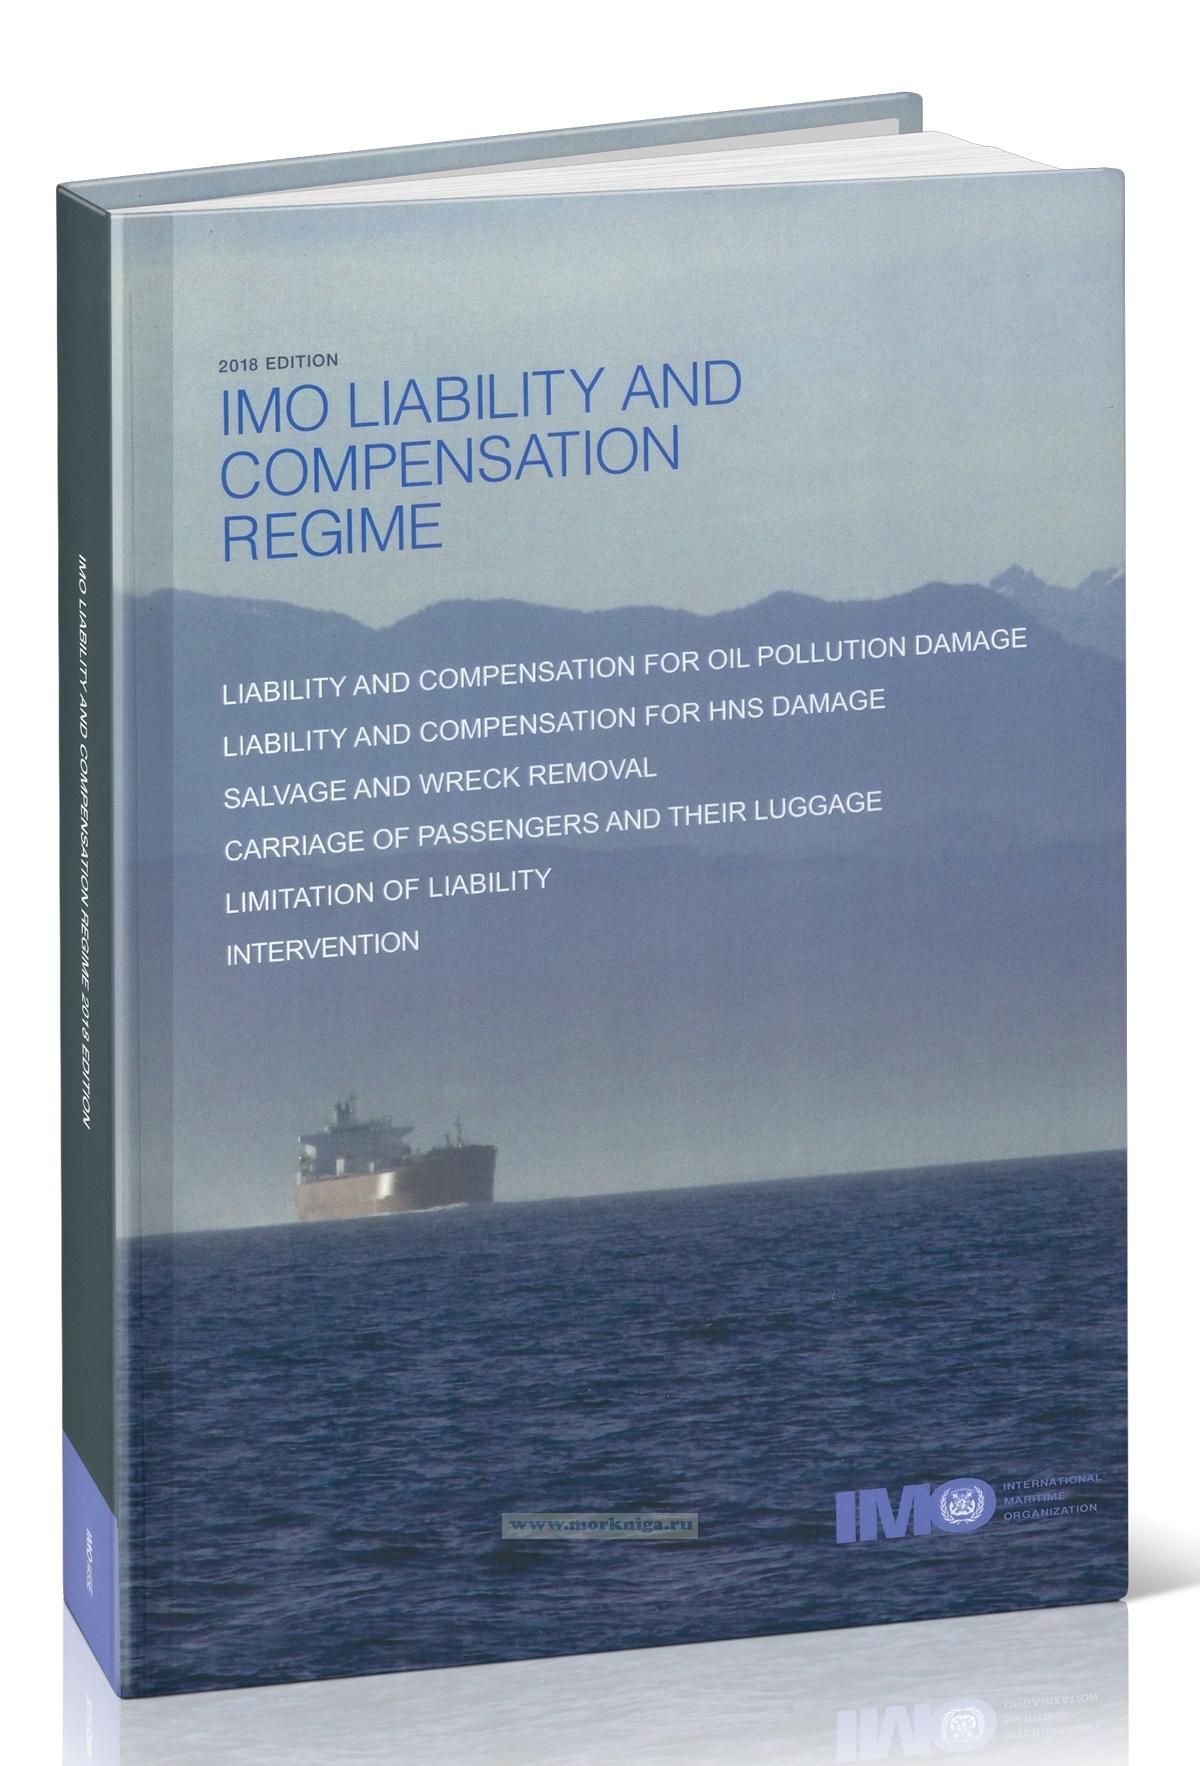 IMO Liability and Compensation Regime